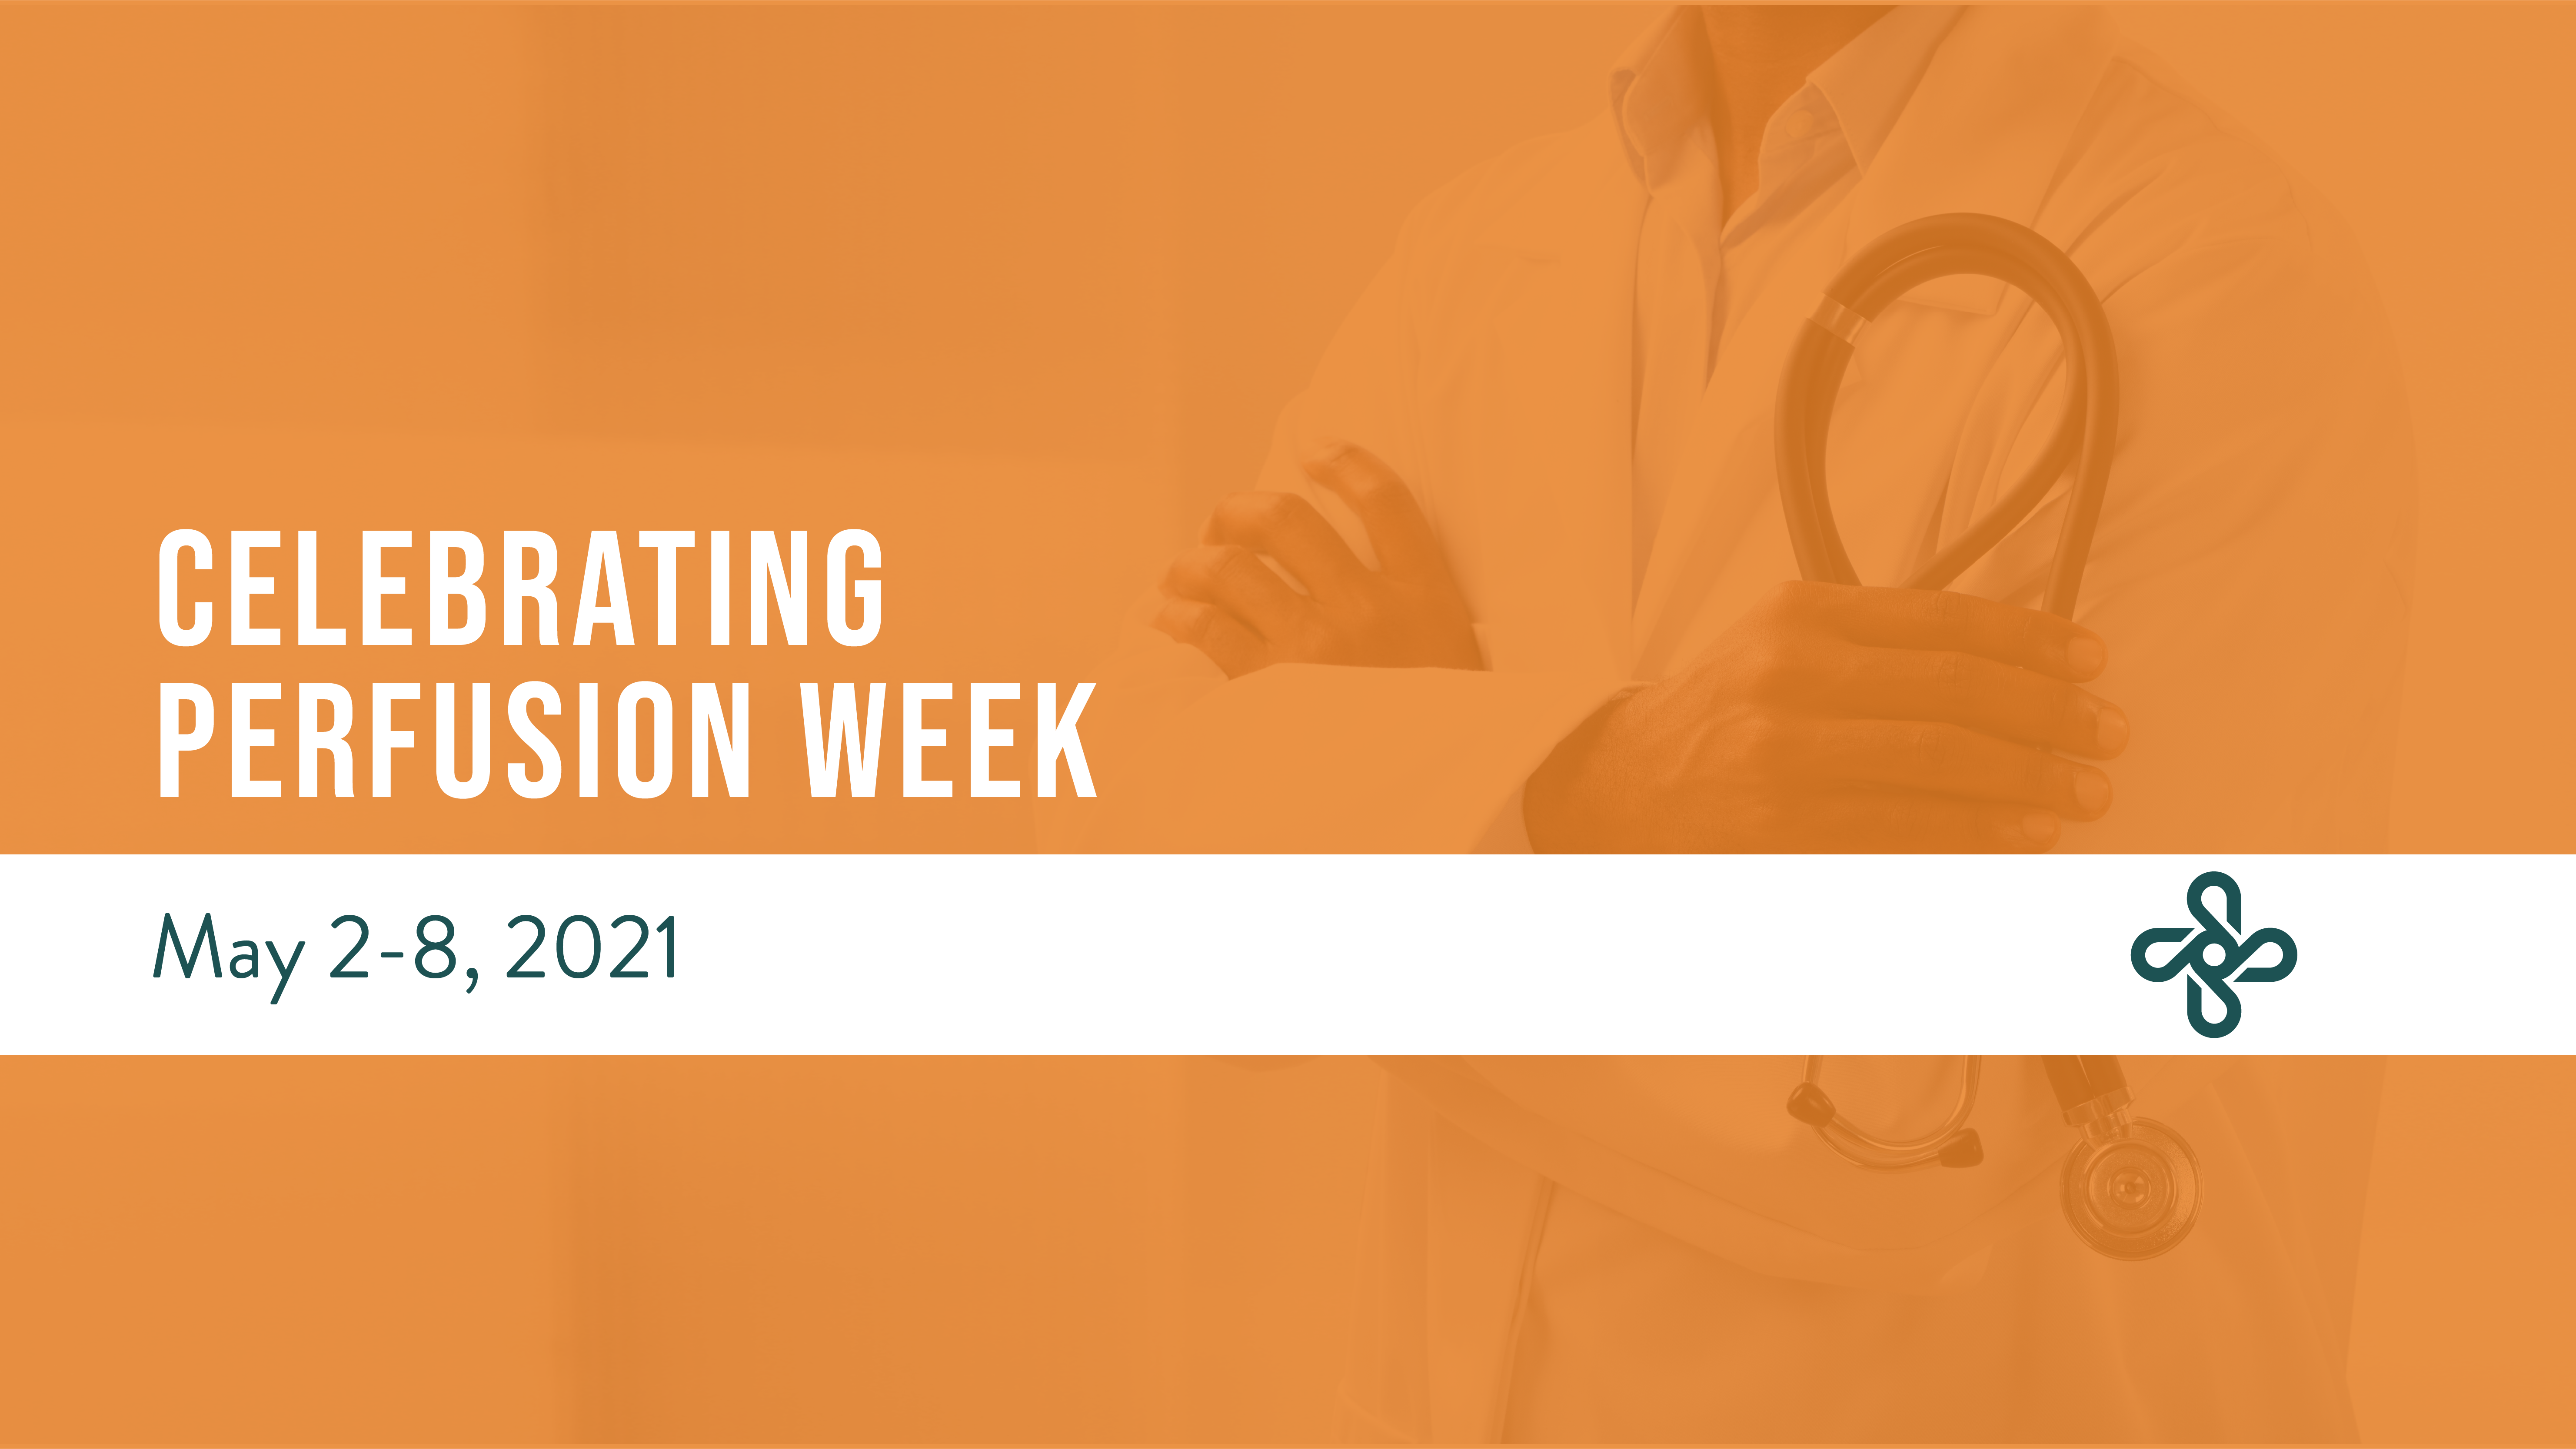 Celebrating Perfusion Week - SpecialtyCare